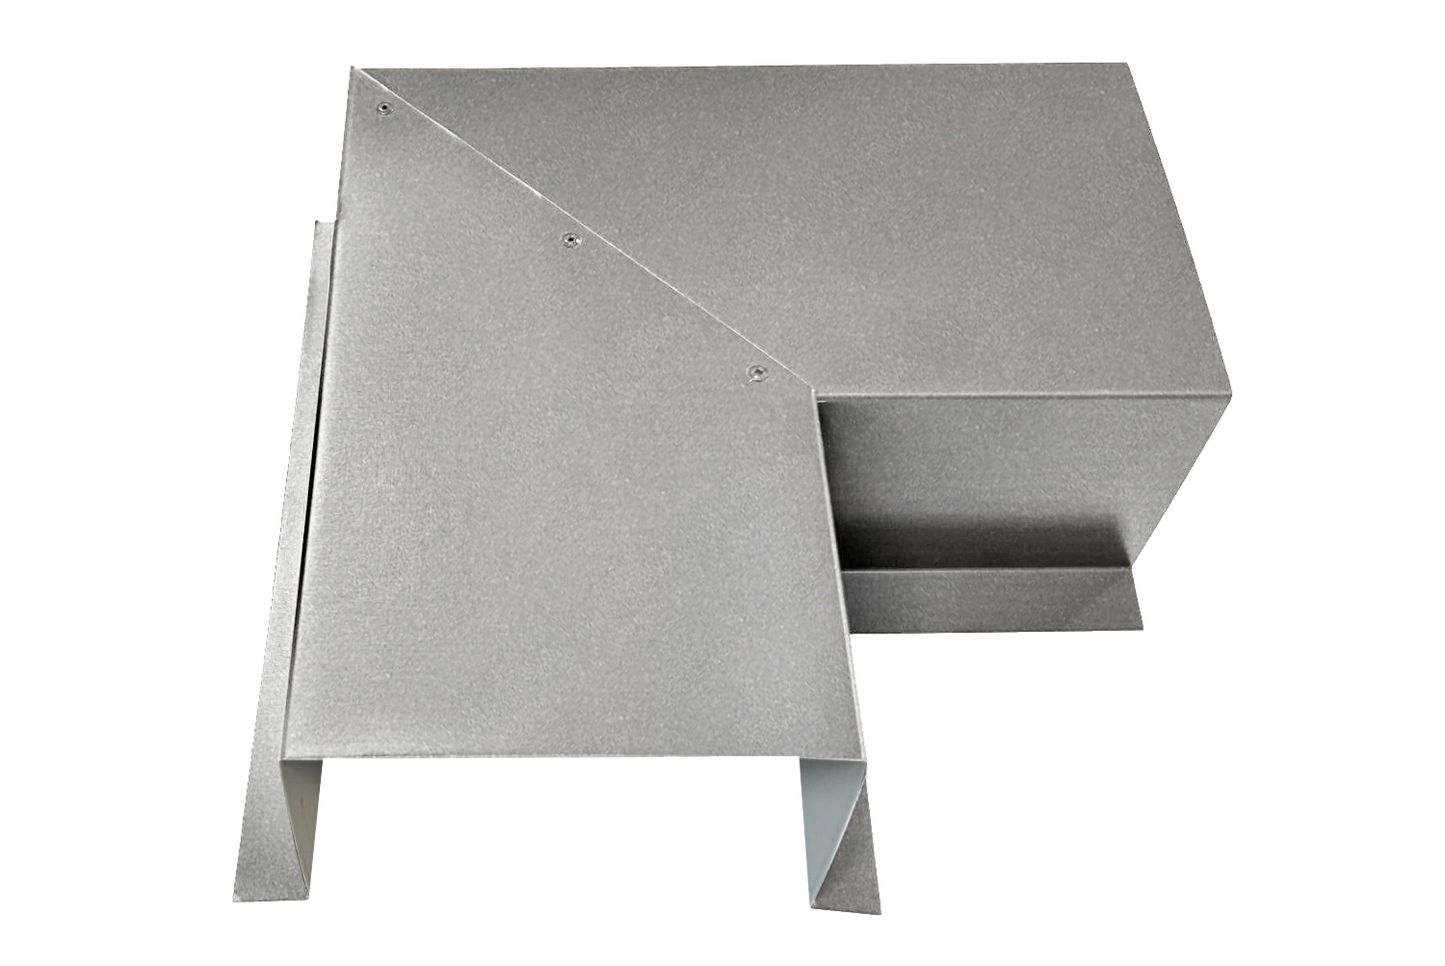 A Perma Cover Commercial Series - 24 Gauge Line Set Cover Side Turning Elbows - Premium Quality features three visible angled panels and a small tab extension on the bottom left side against a white background. The panel edges have visible screws for easy installation.